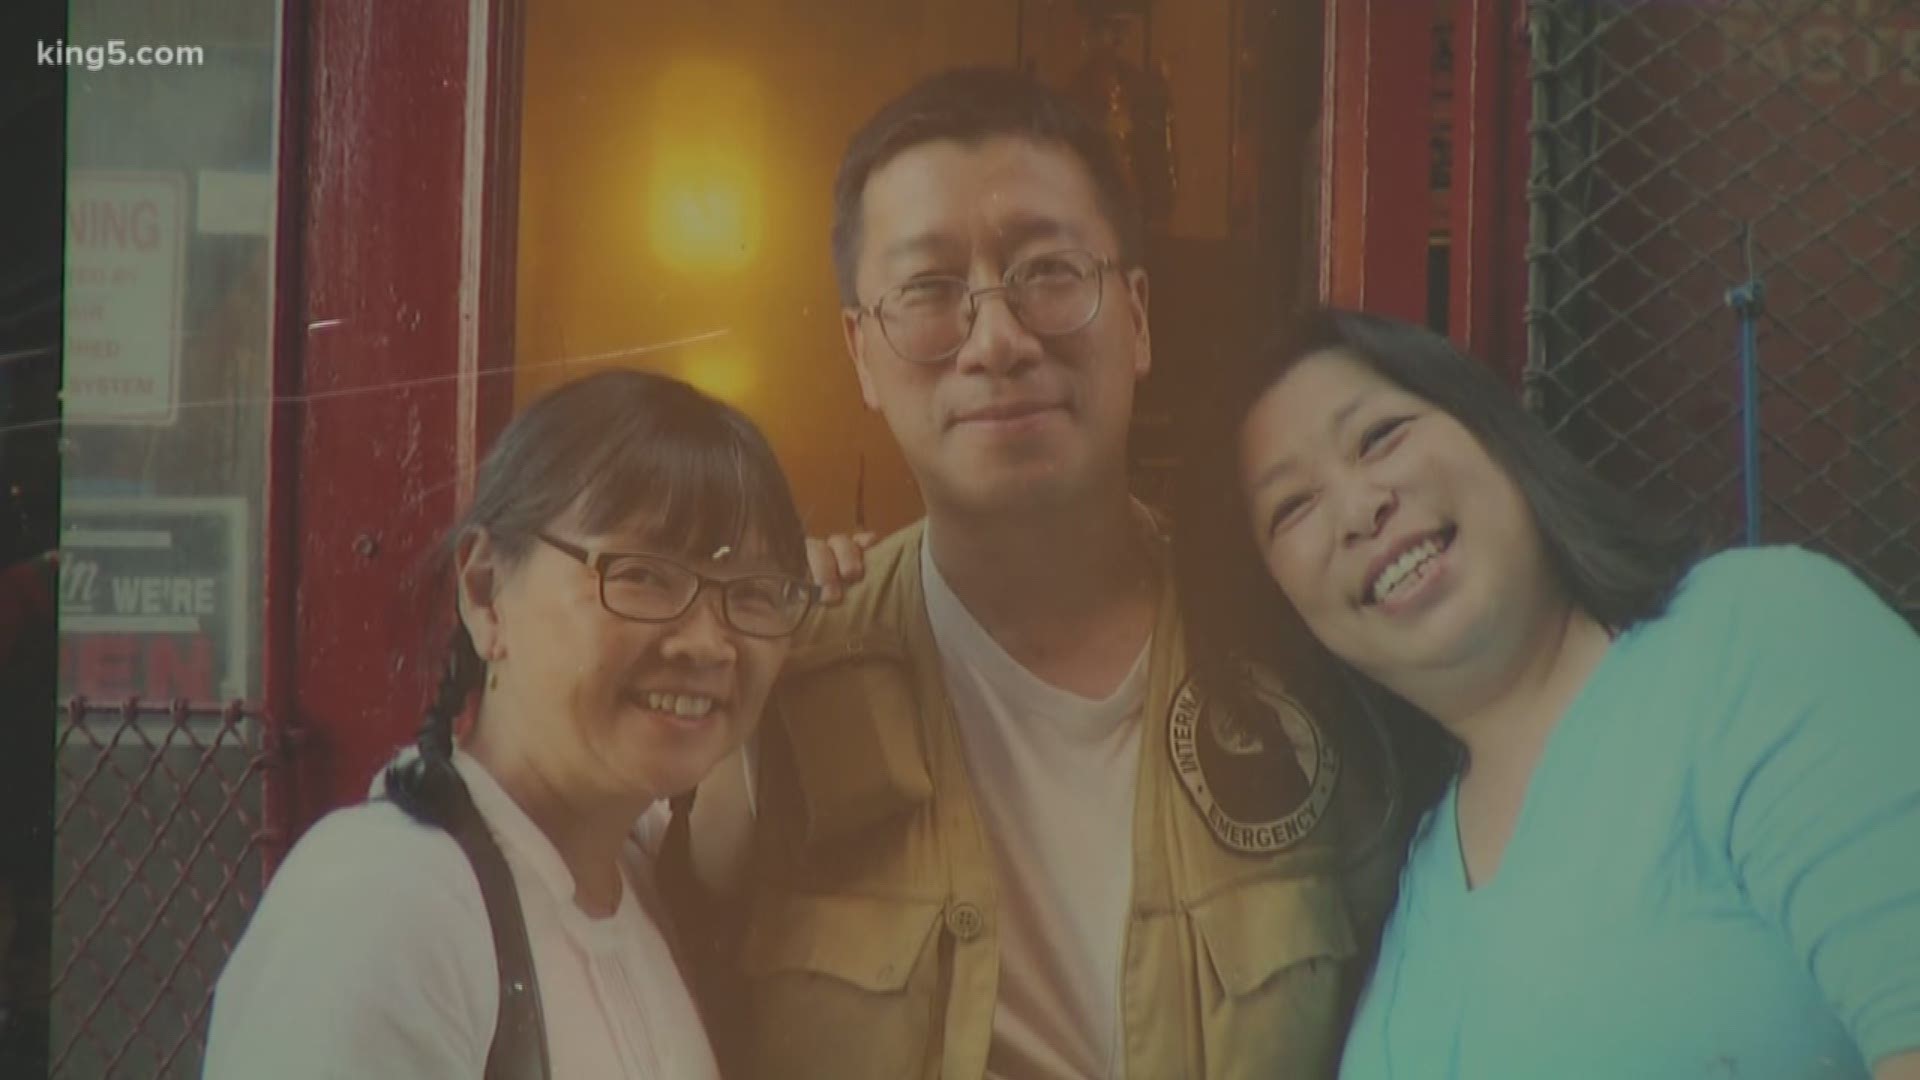 It's been four years since activist Donnie Chin was killed in Seattle. Now his friends and family are keeping his memory and legacy alive in the neighborhood he loved so much, as the search for his killer continues. KING 5's Natalie Swaby reports.